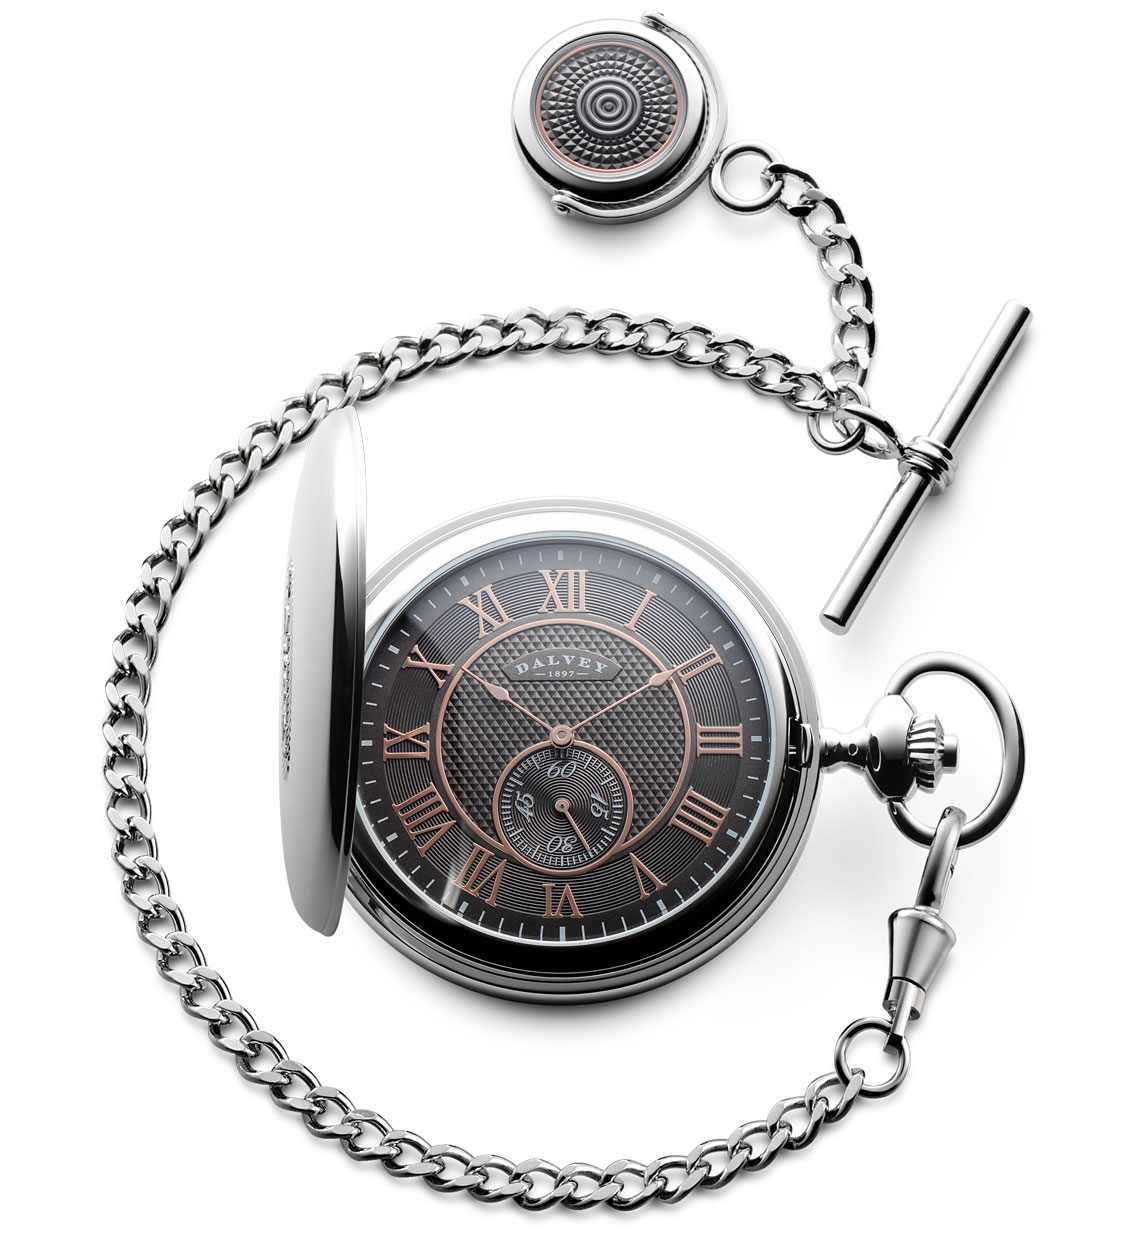 Heavy Sterling Silver Double Albert Pocket Watch Chain with Fob:  ashlandwatches.com